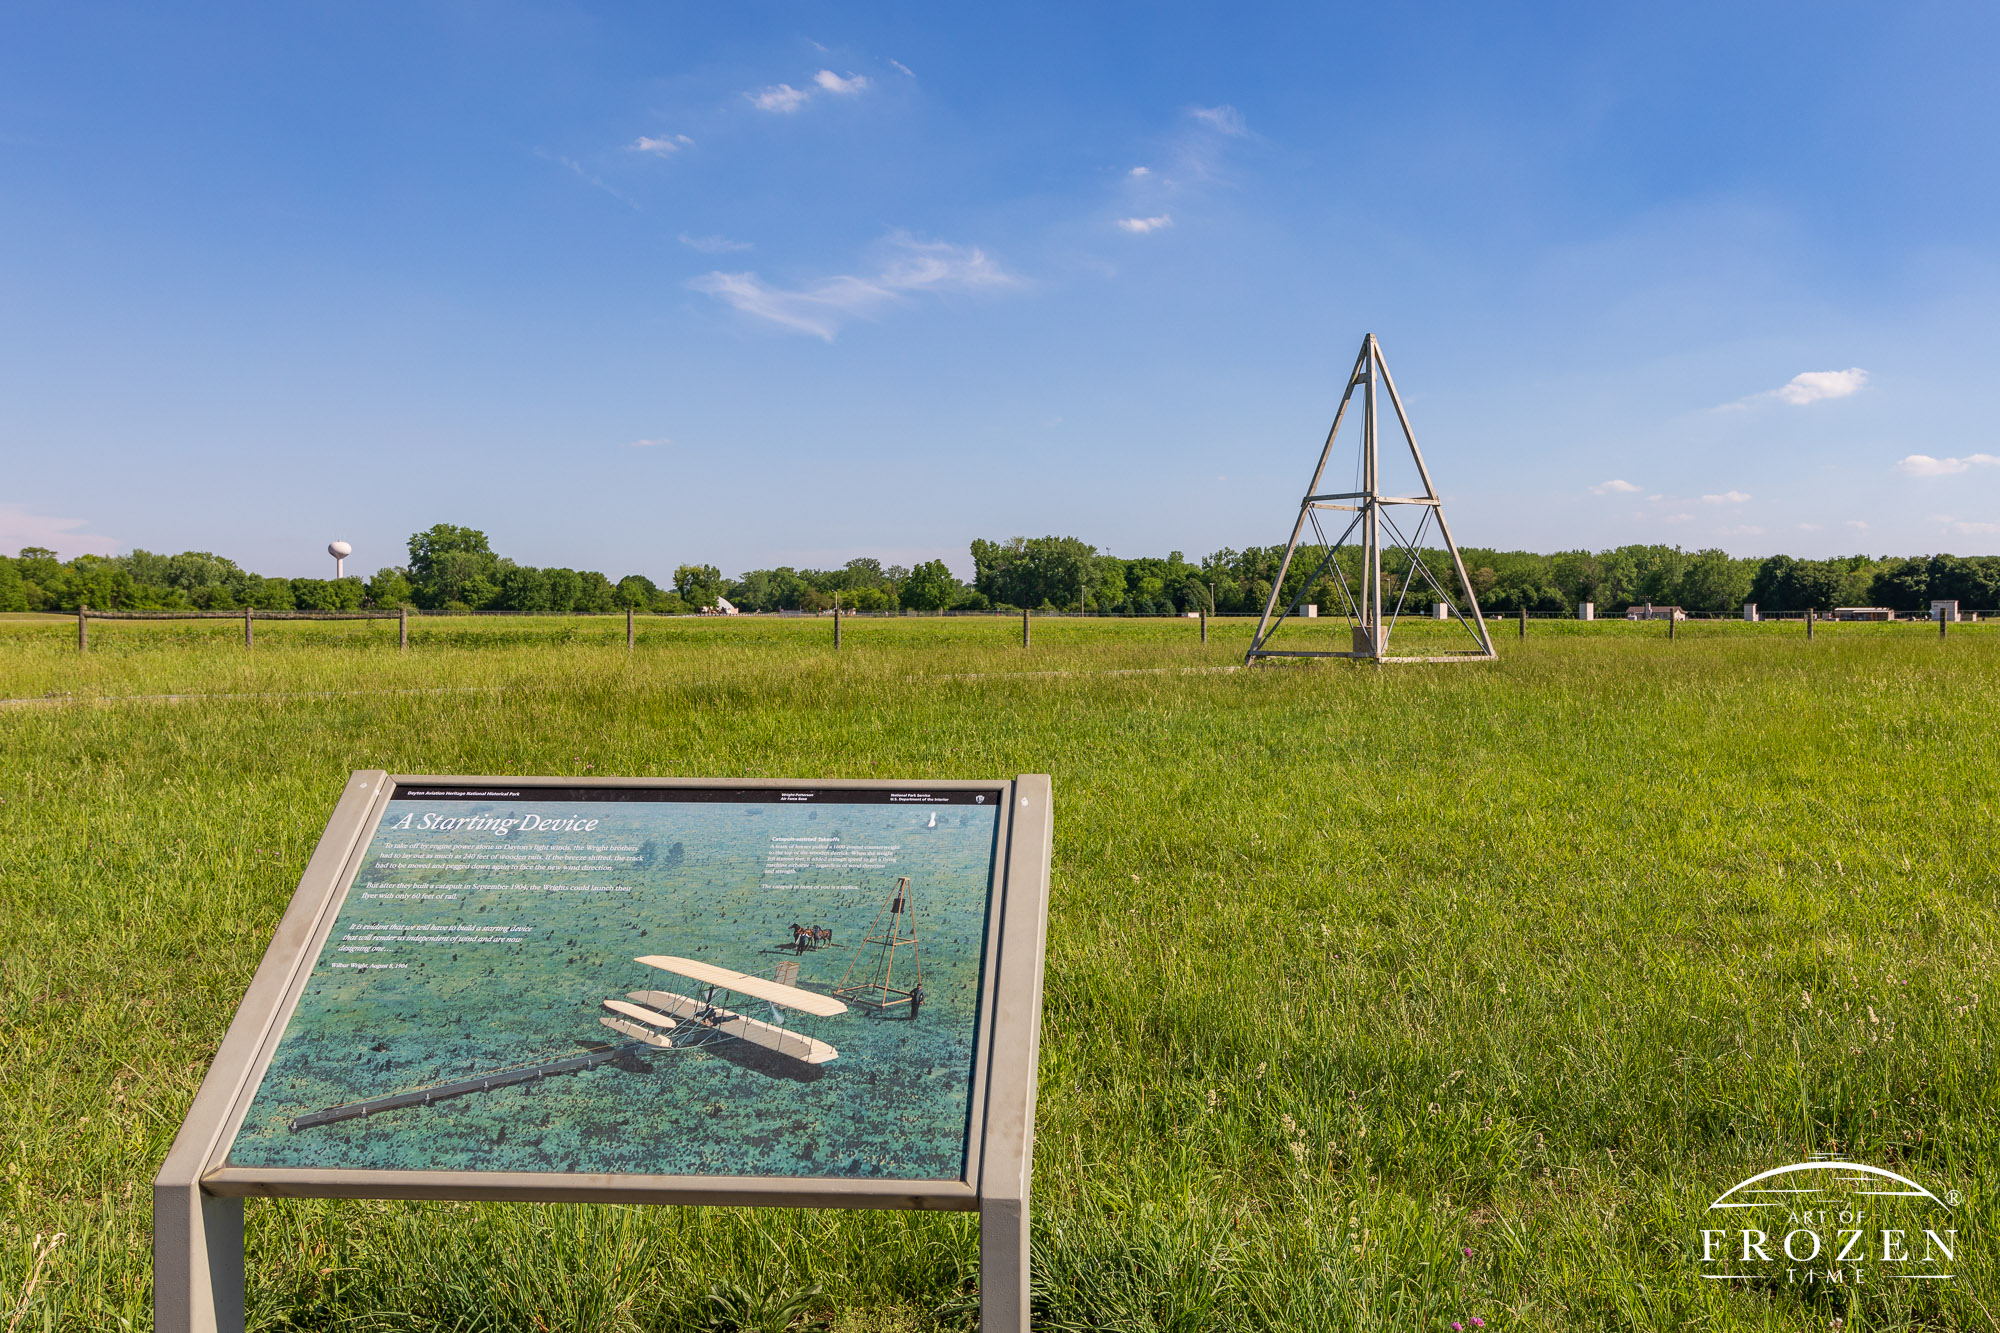 An explanatory sign at Huffman Prairie which explains how the Wright Brothers used a catapult lanunching system to get their Wrigth Flyer airborne